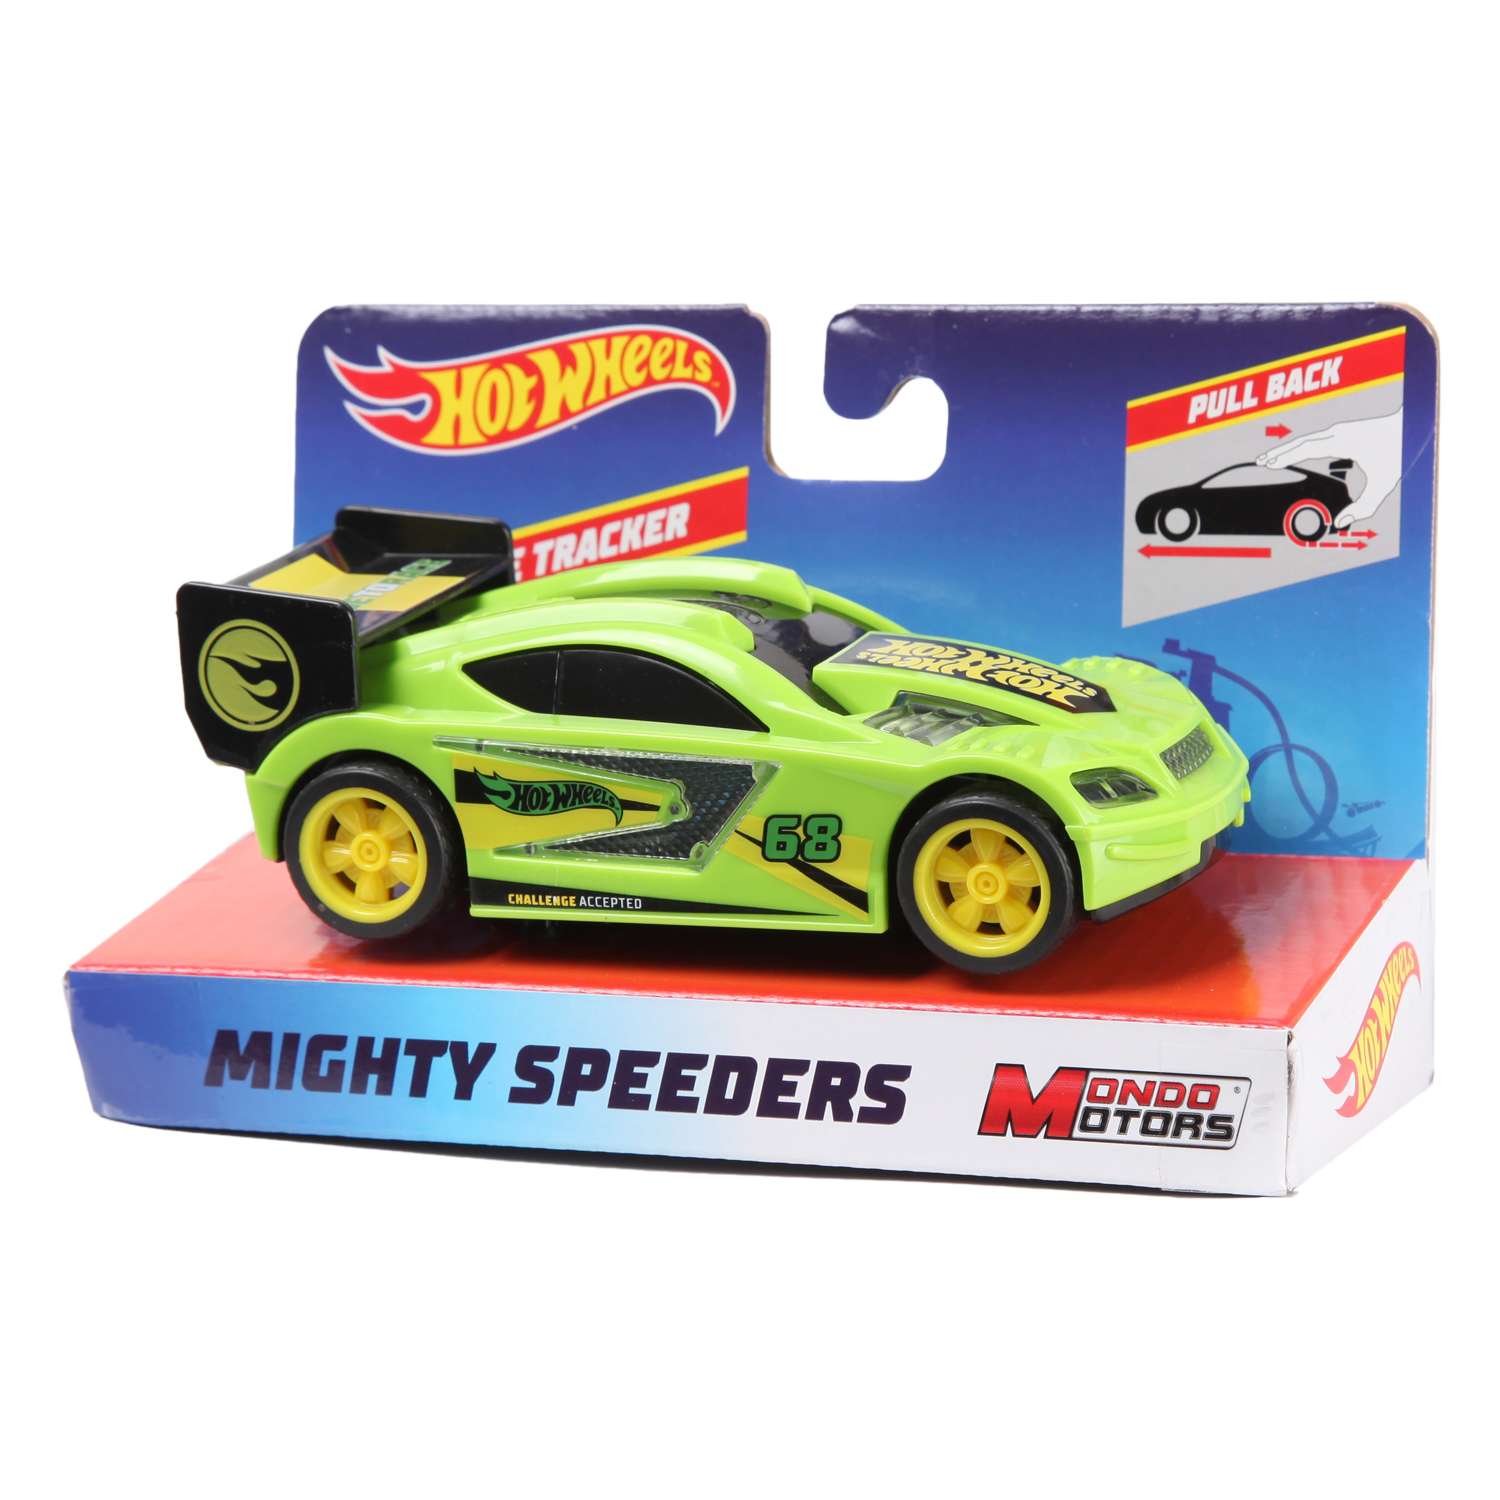 Машина Hot Wheels Mighty Speeders Time Tracer 51206 51206 - фото 2